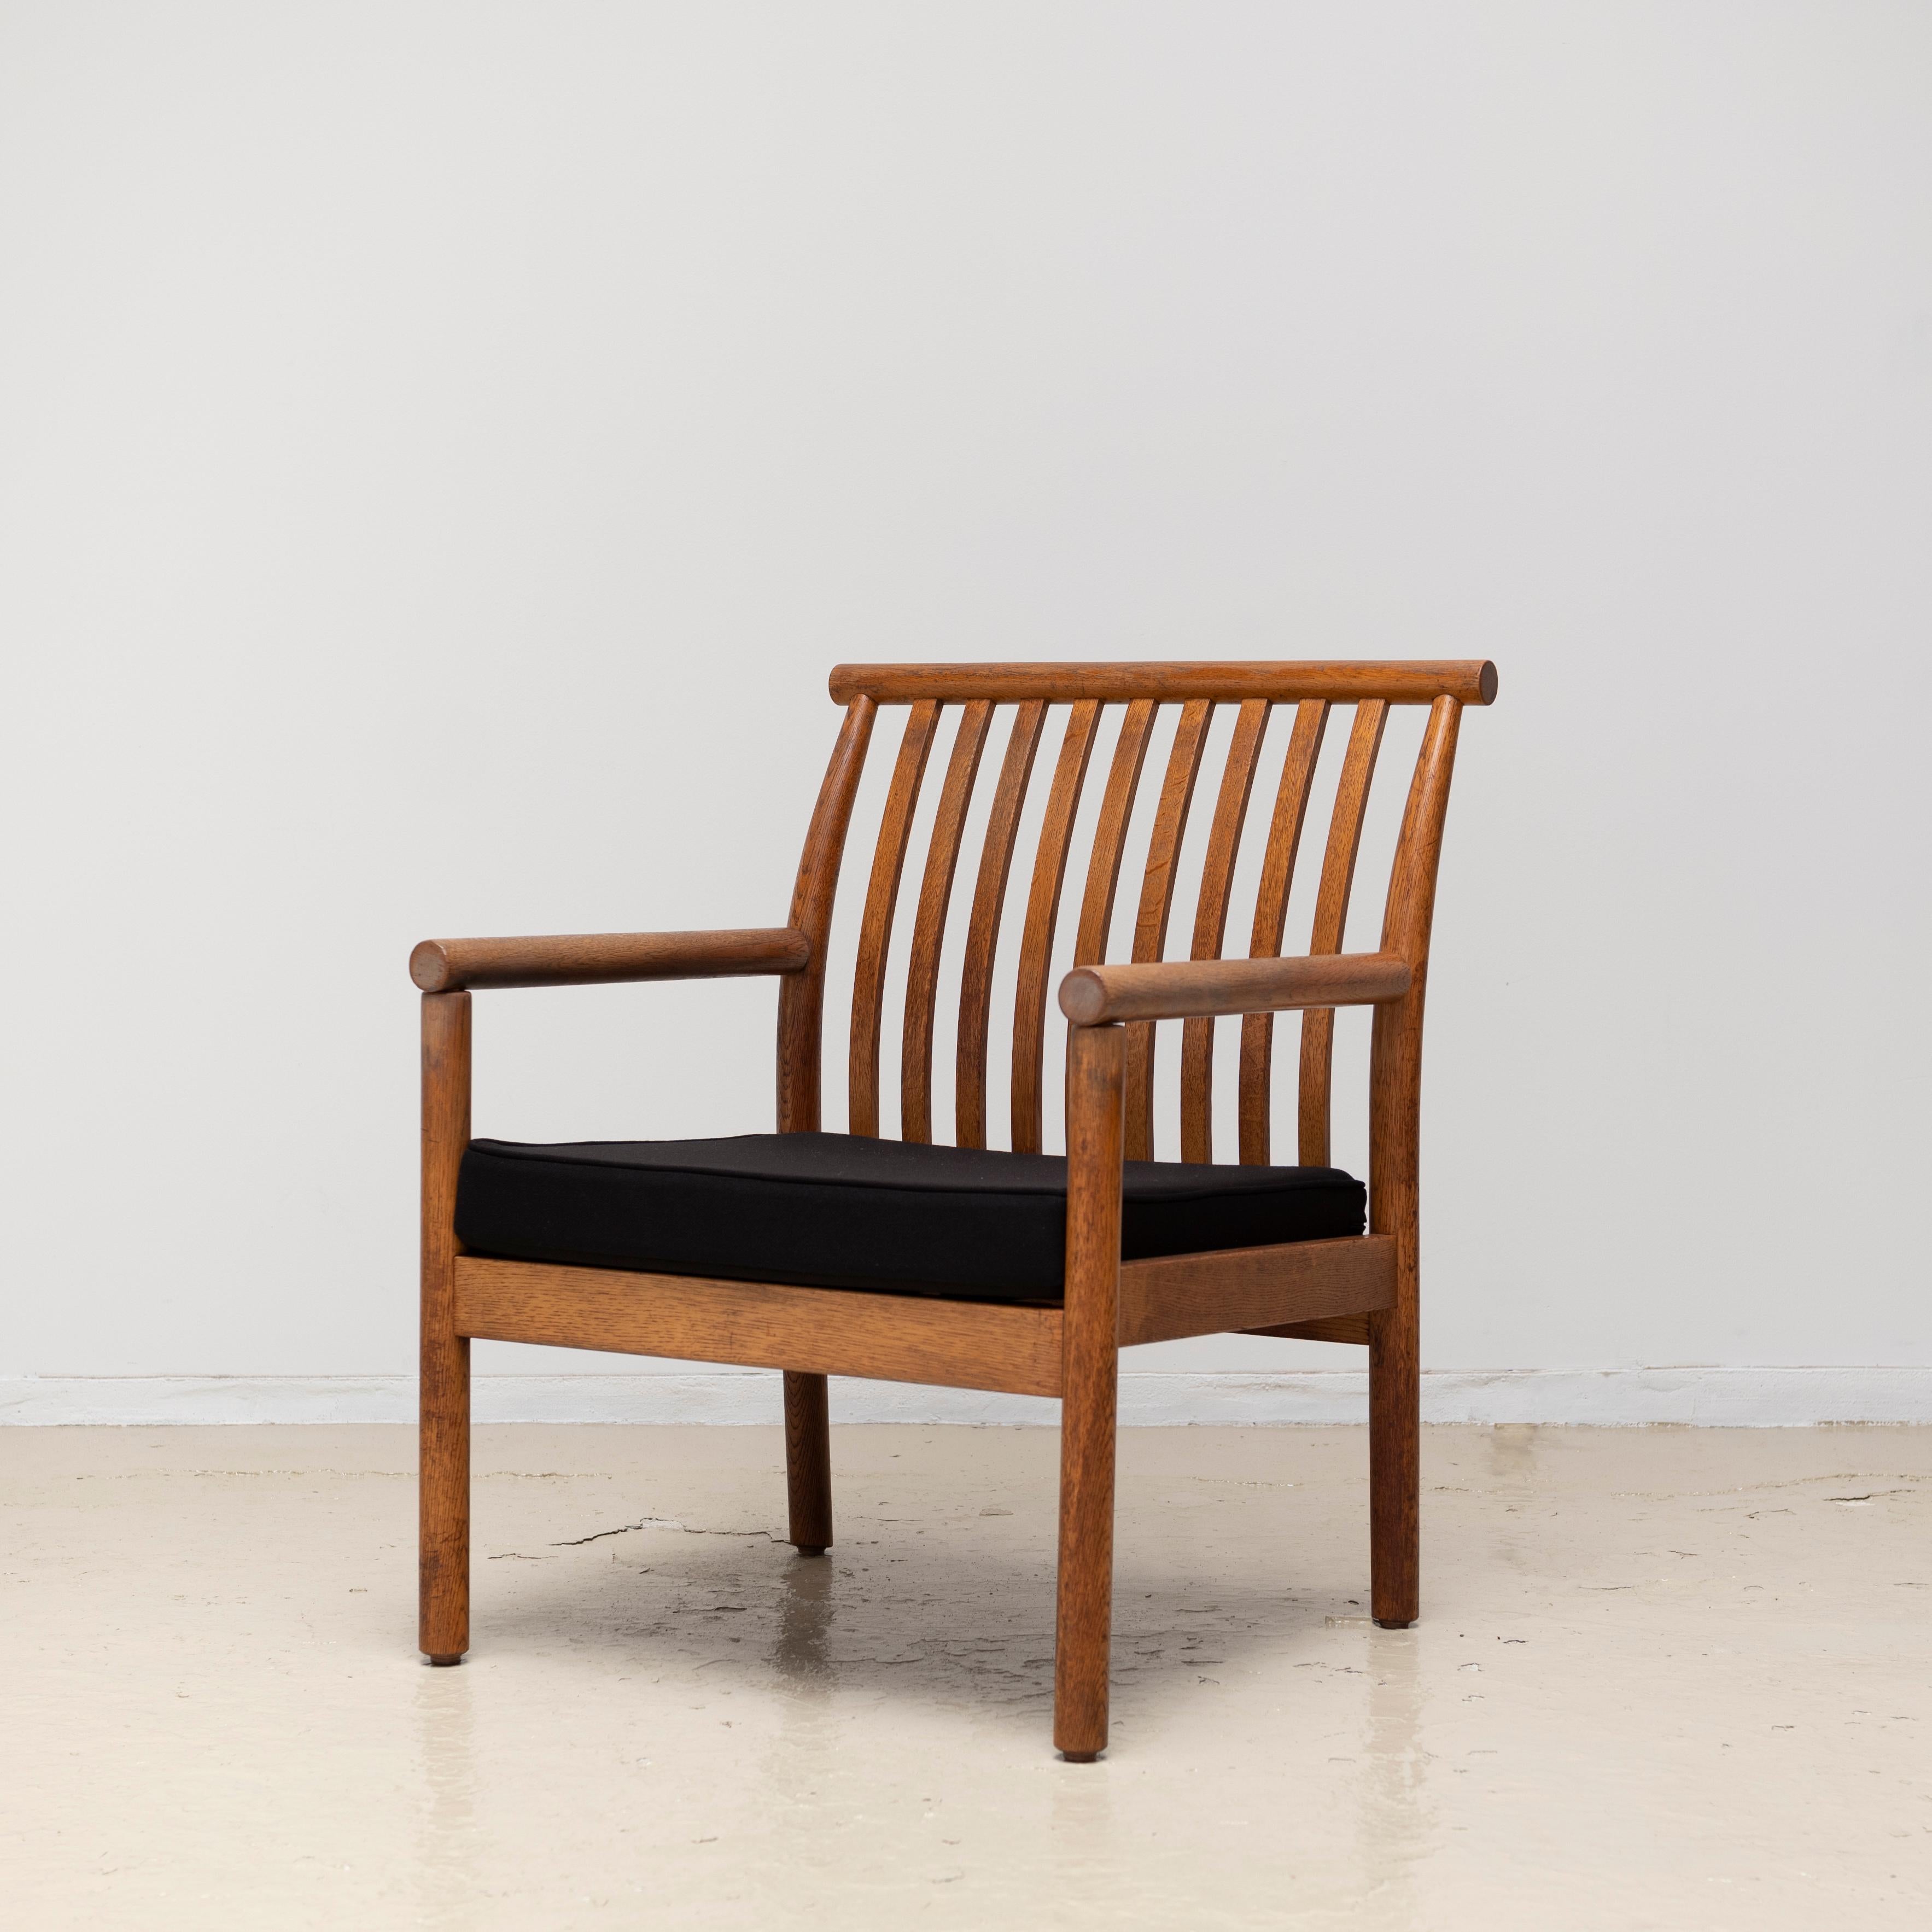 A lounge chair designed by Isamu Kenmochi in 1960s.
The manufacturer, Akita Mokko, is an experts of the bentwood technique.
The curve of the spokes of the back is very beautiful.
The cushion in dark brown color is new.